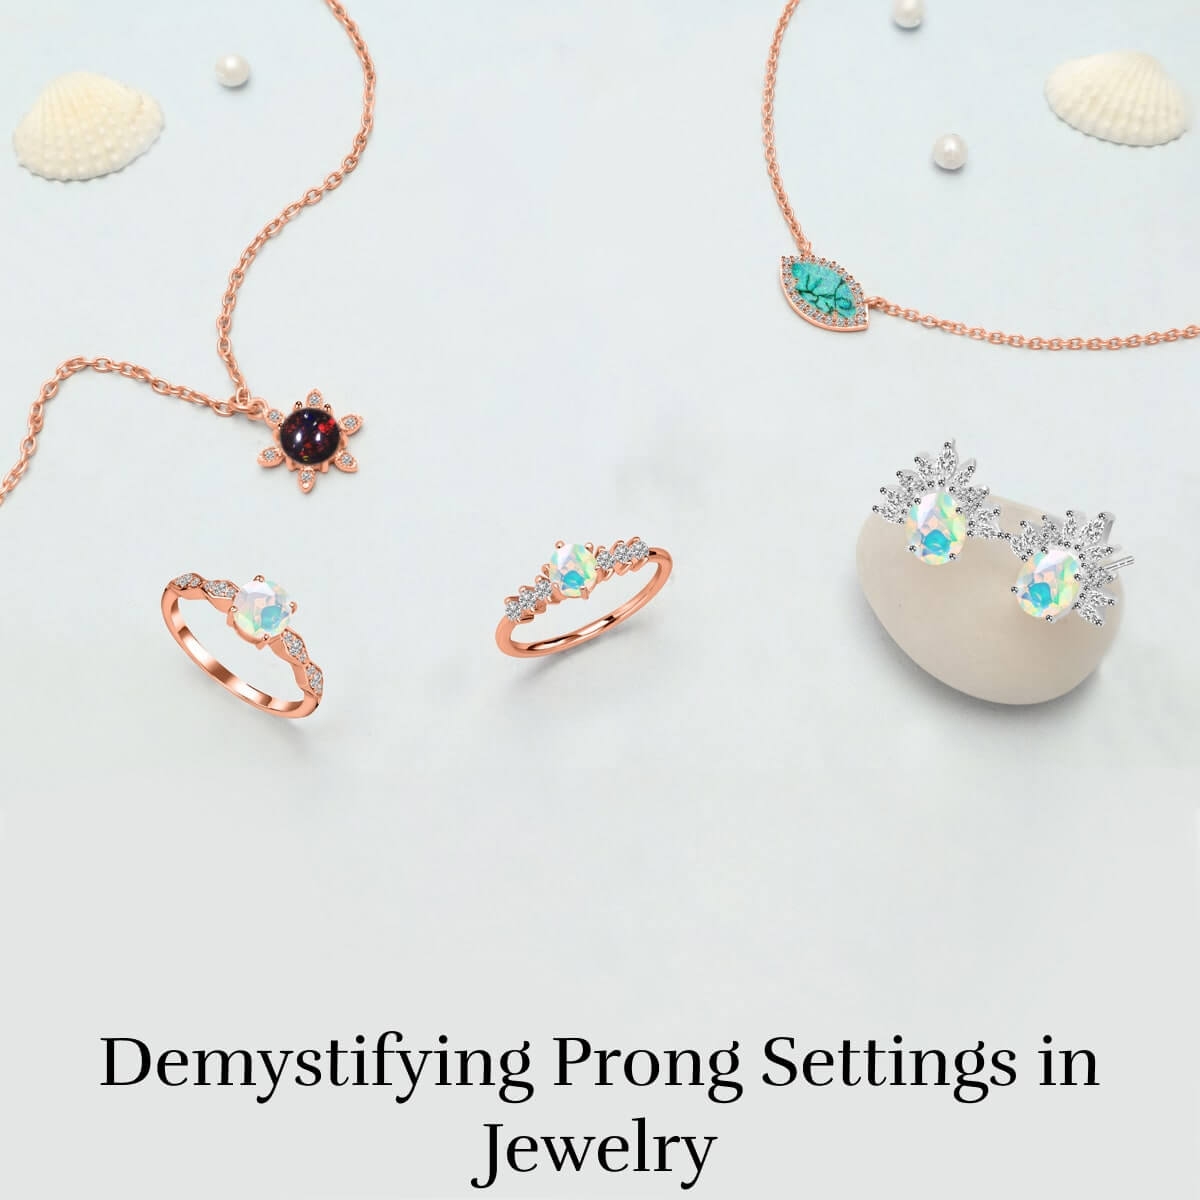 Prong Settings in Jewelry